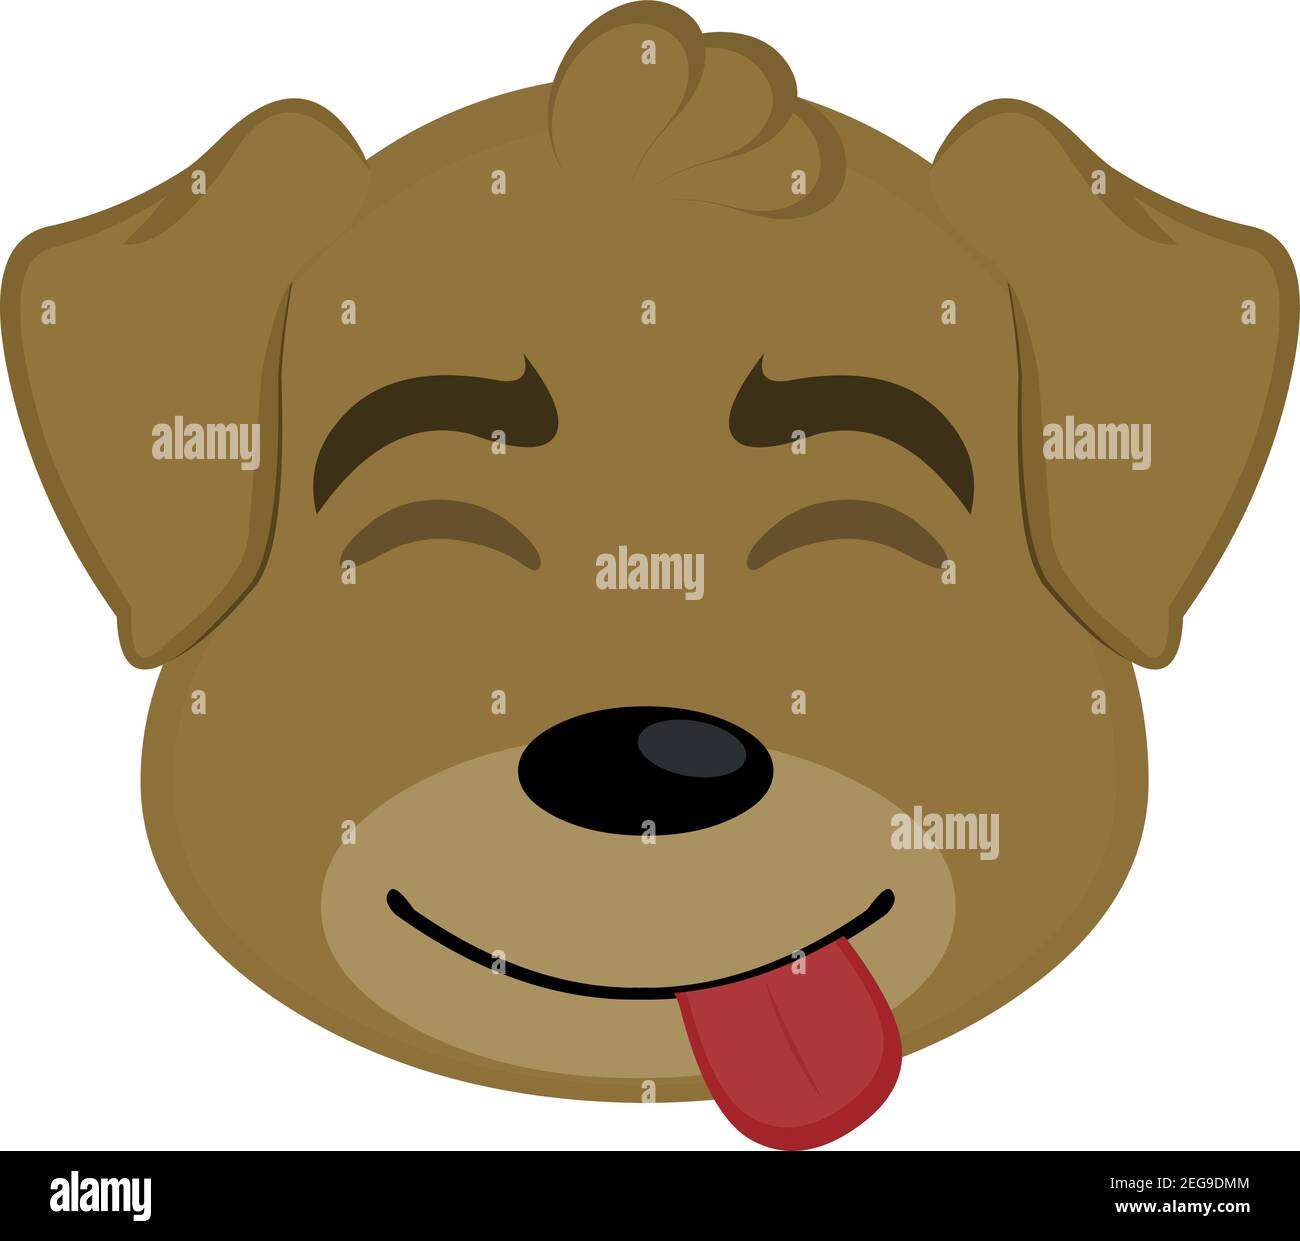 Vector emoticon  illustration cartoon of a dog's head with a joyful expression of pleasure with its eyes closed and sticking out its tongue Stock Vector